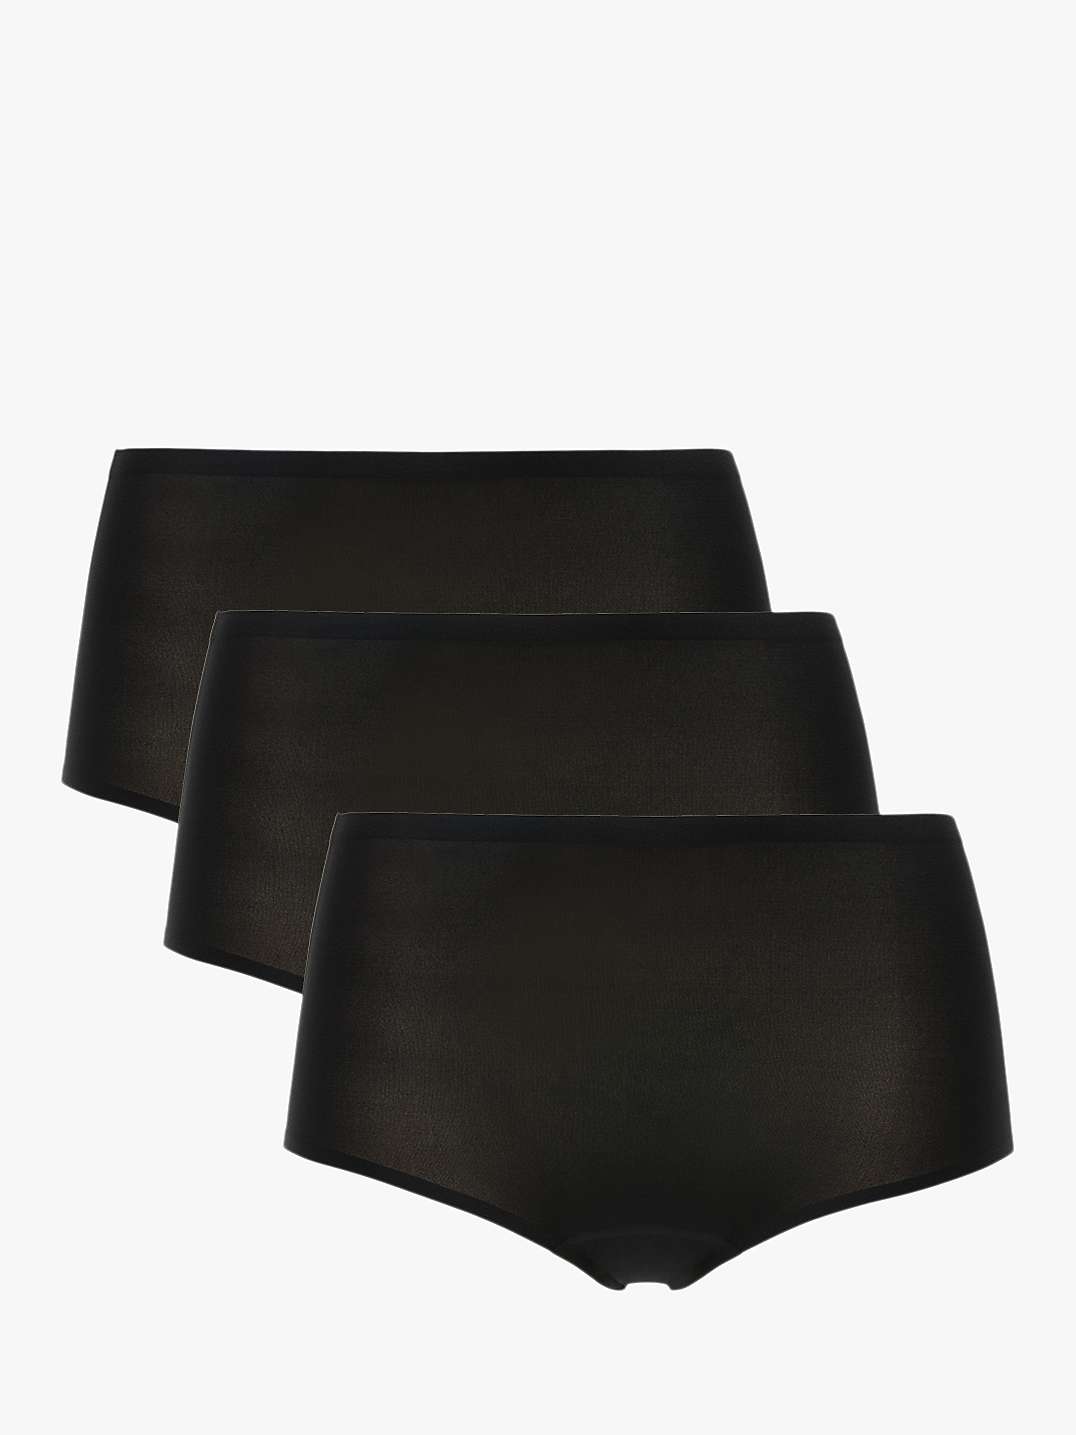 Buy Chantelle Soft Stretch High Waist Knickers, Pack of 3 Online at johnlewis.com